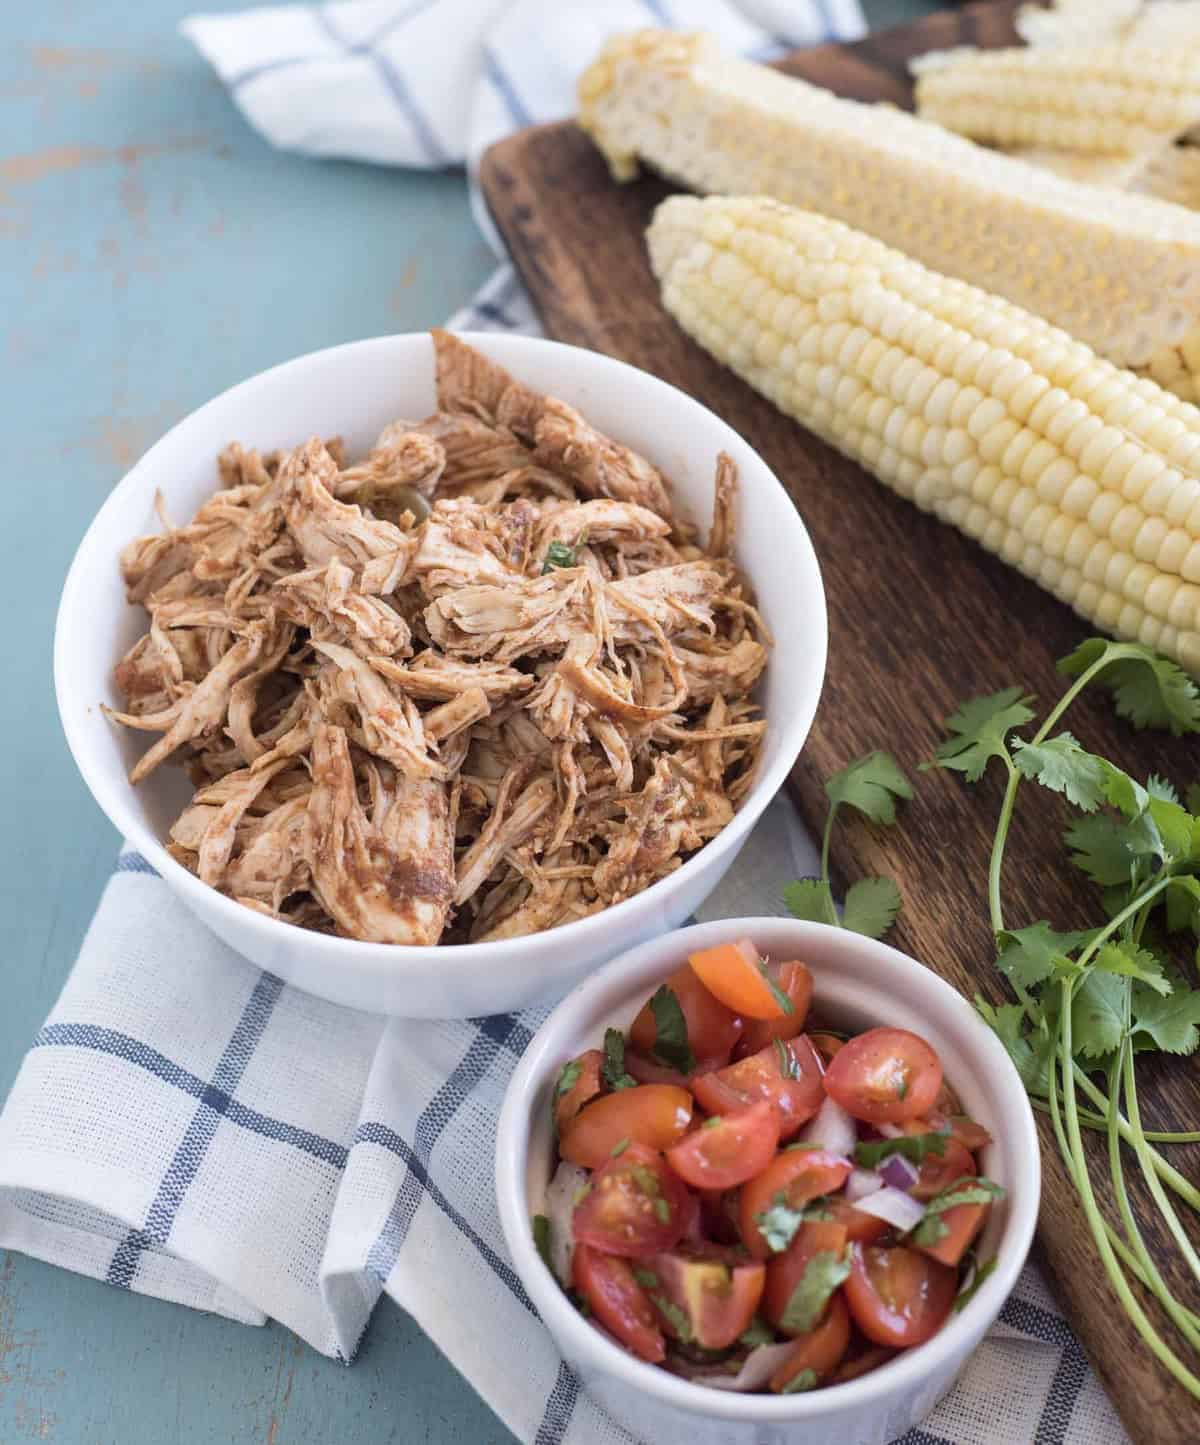 Instant Pot Chipotle Chicken Taco Meat is made with just a few simple ingredients but packs tons of flavor and is done in about 25 minutes.